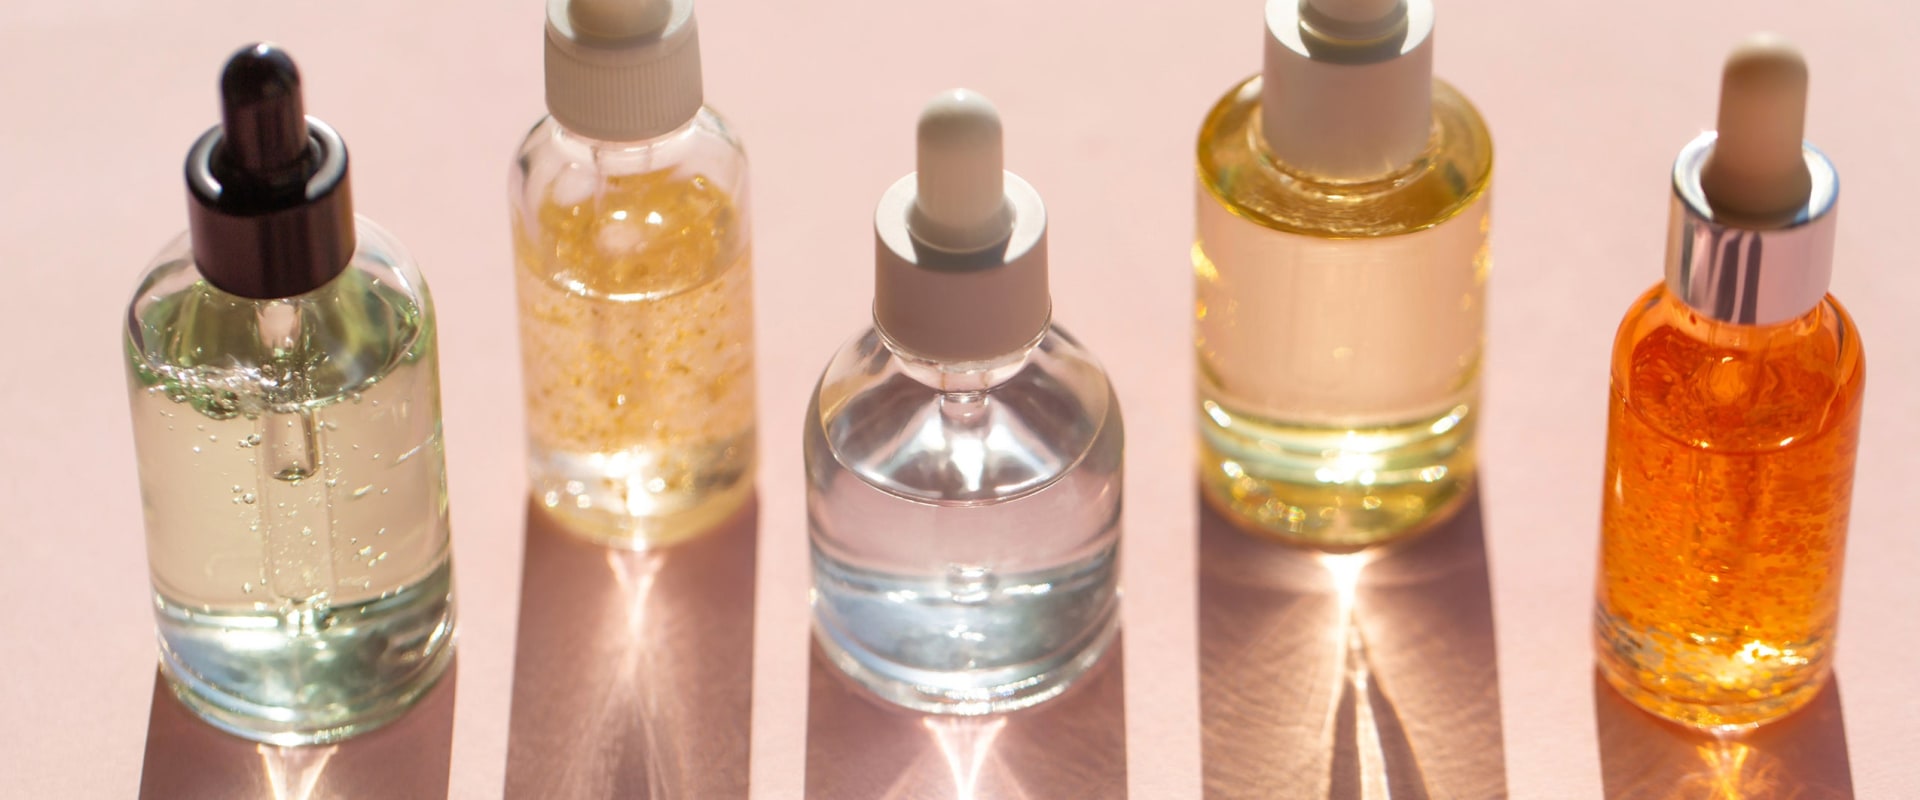 Types of Fragrance Samples: An In-Depth Look